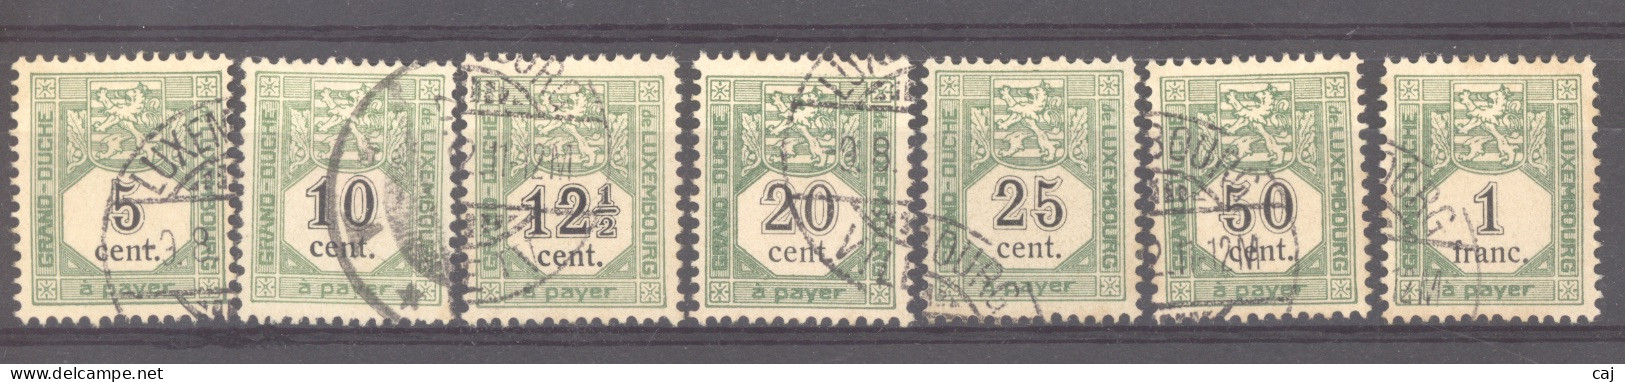 Luxembourg  -  Taxes  :  Mi  1-7  (o) - Postage Due